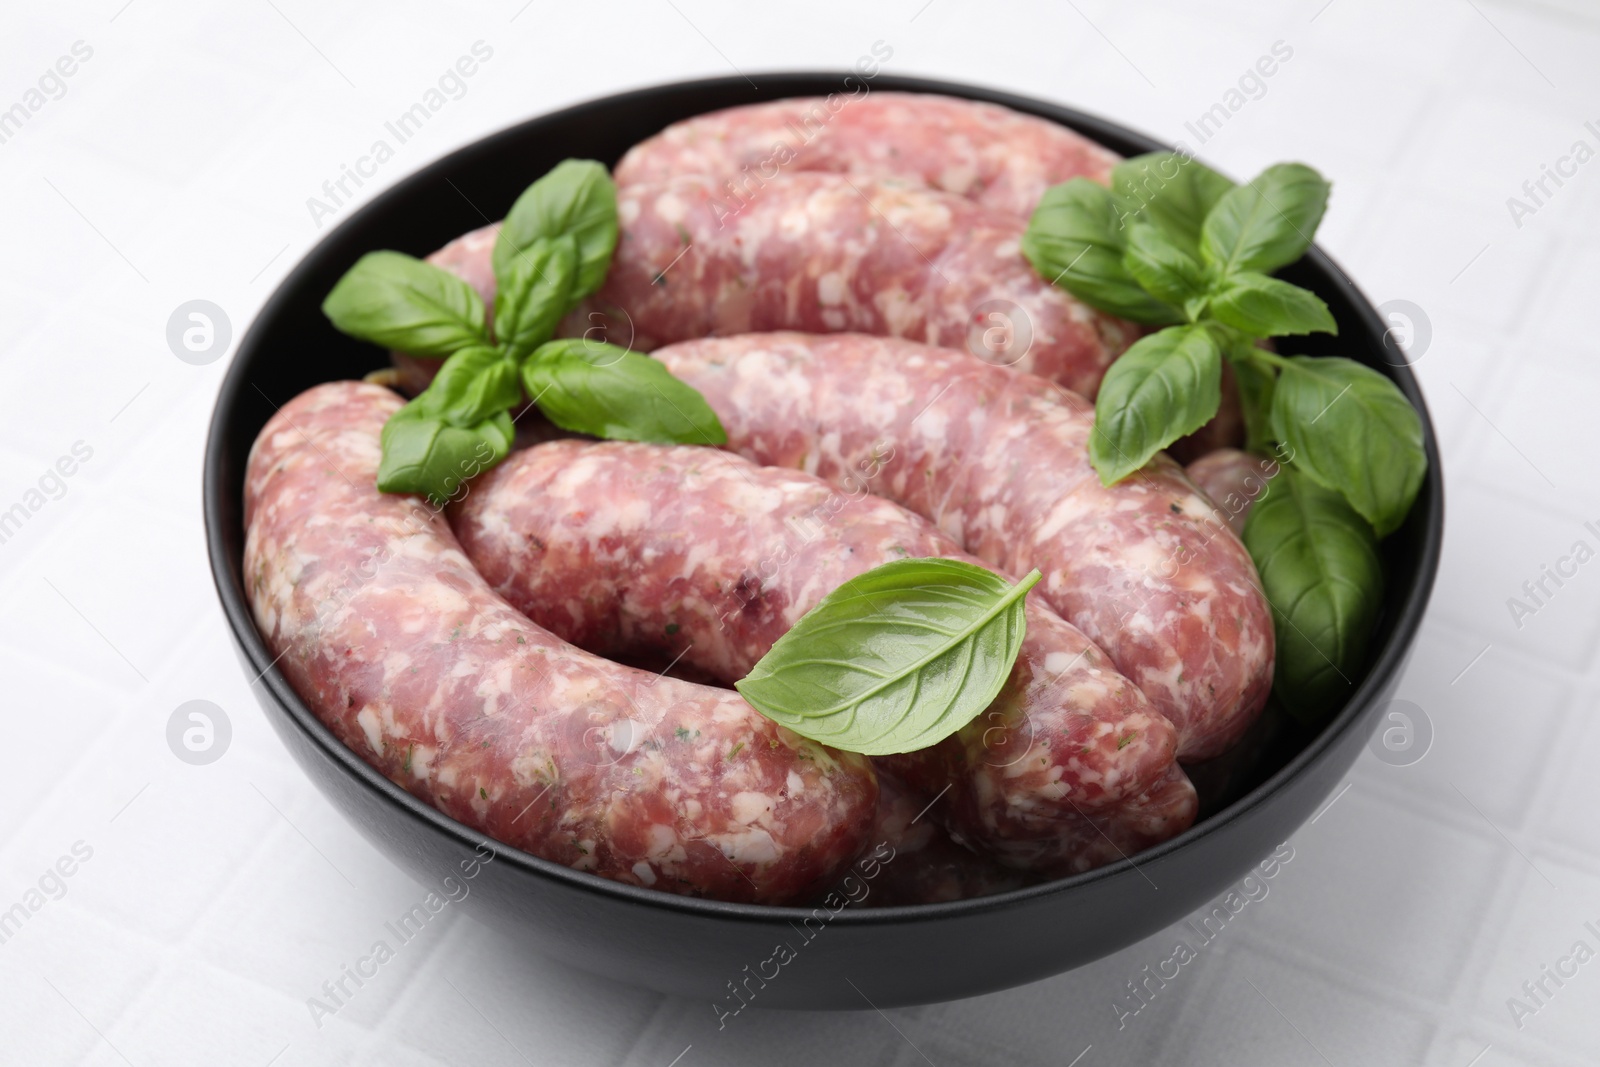 Photo of Raw homemade sausages and basil leaves in bowl on white tiled table, closeup